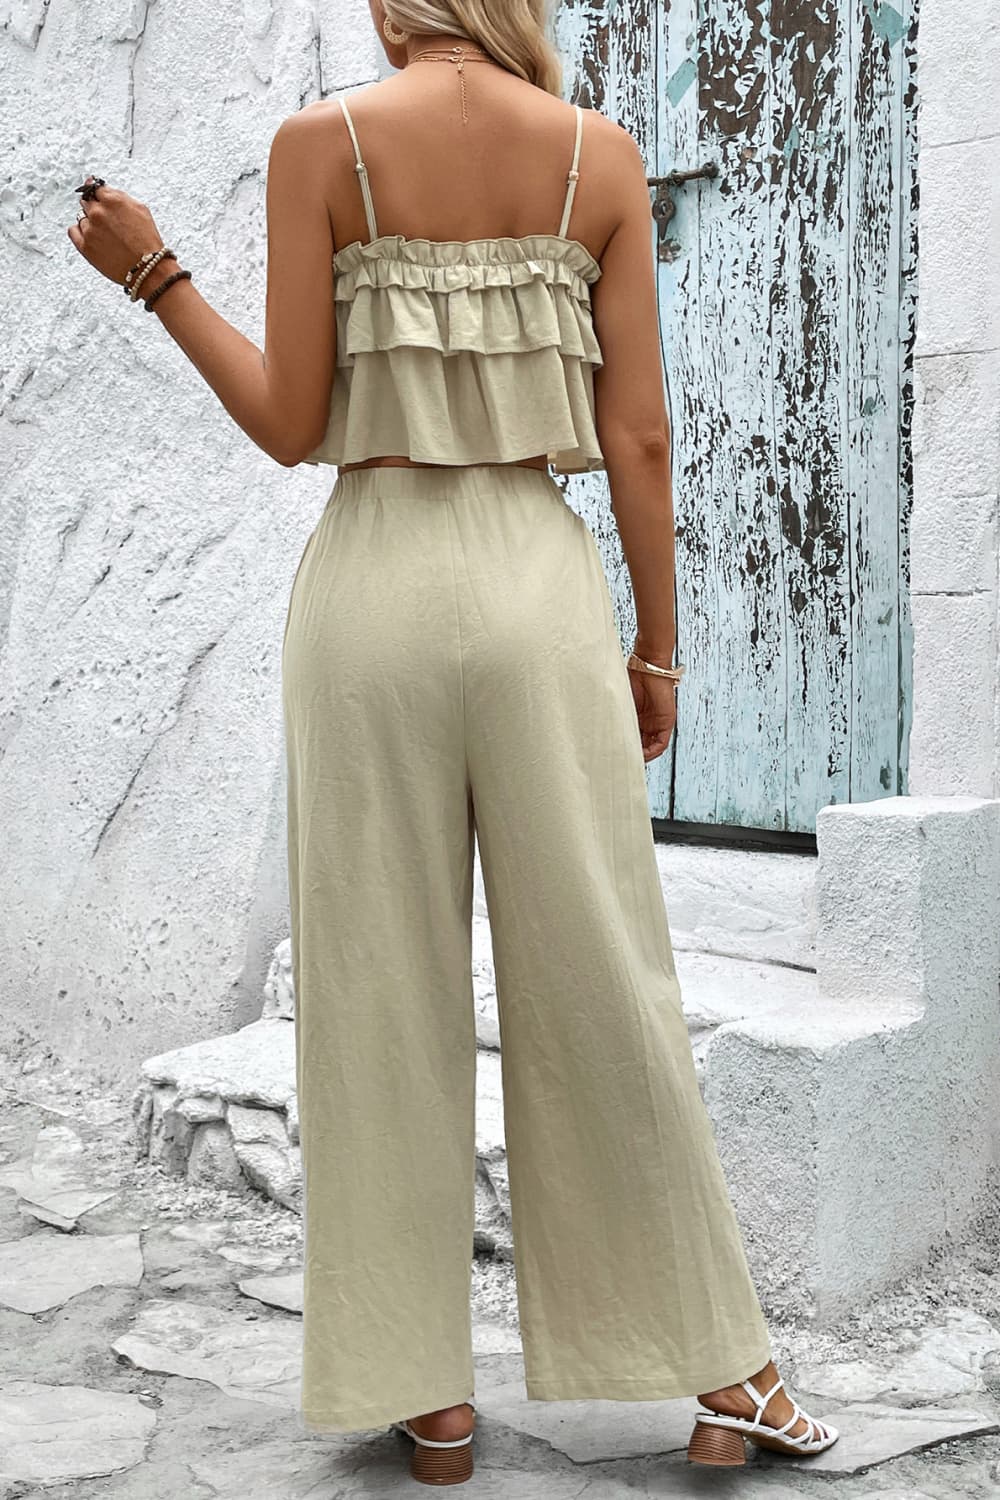 Frill Trim Cami and Wide Leg Pants Set Print on any thing USA/STOD clothes